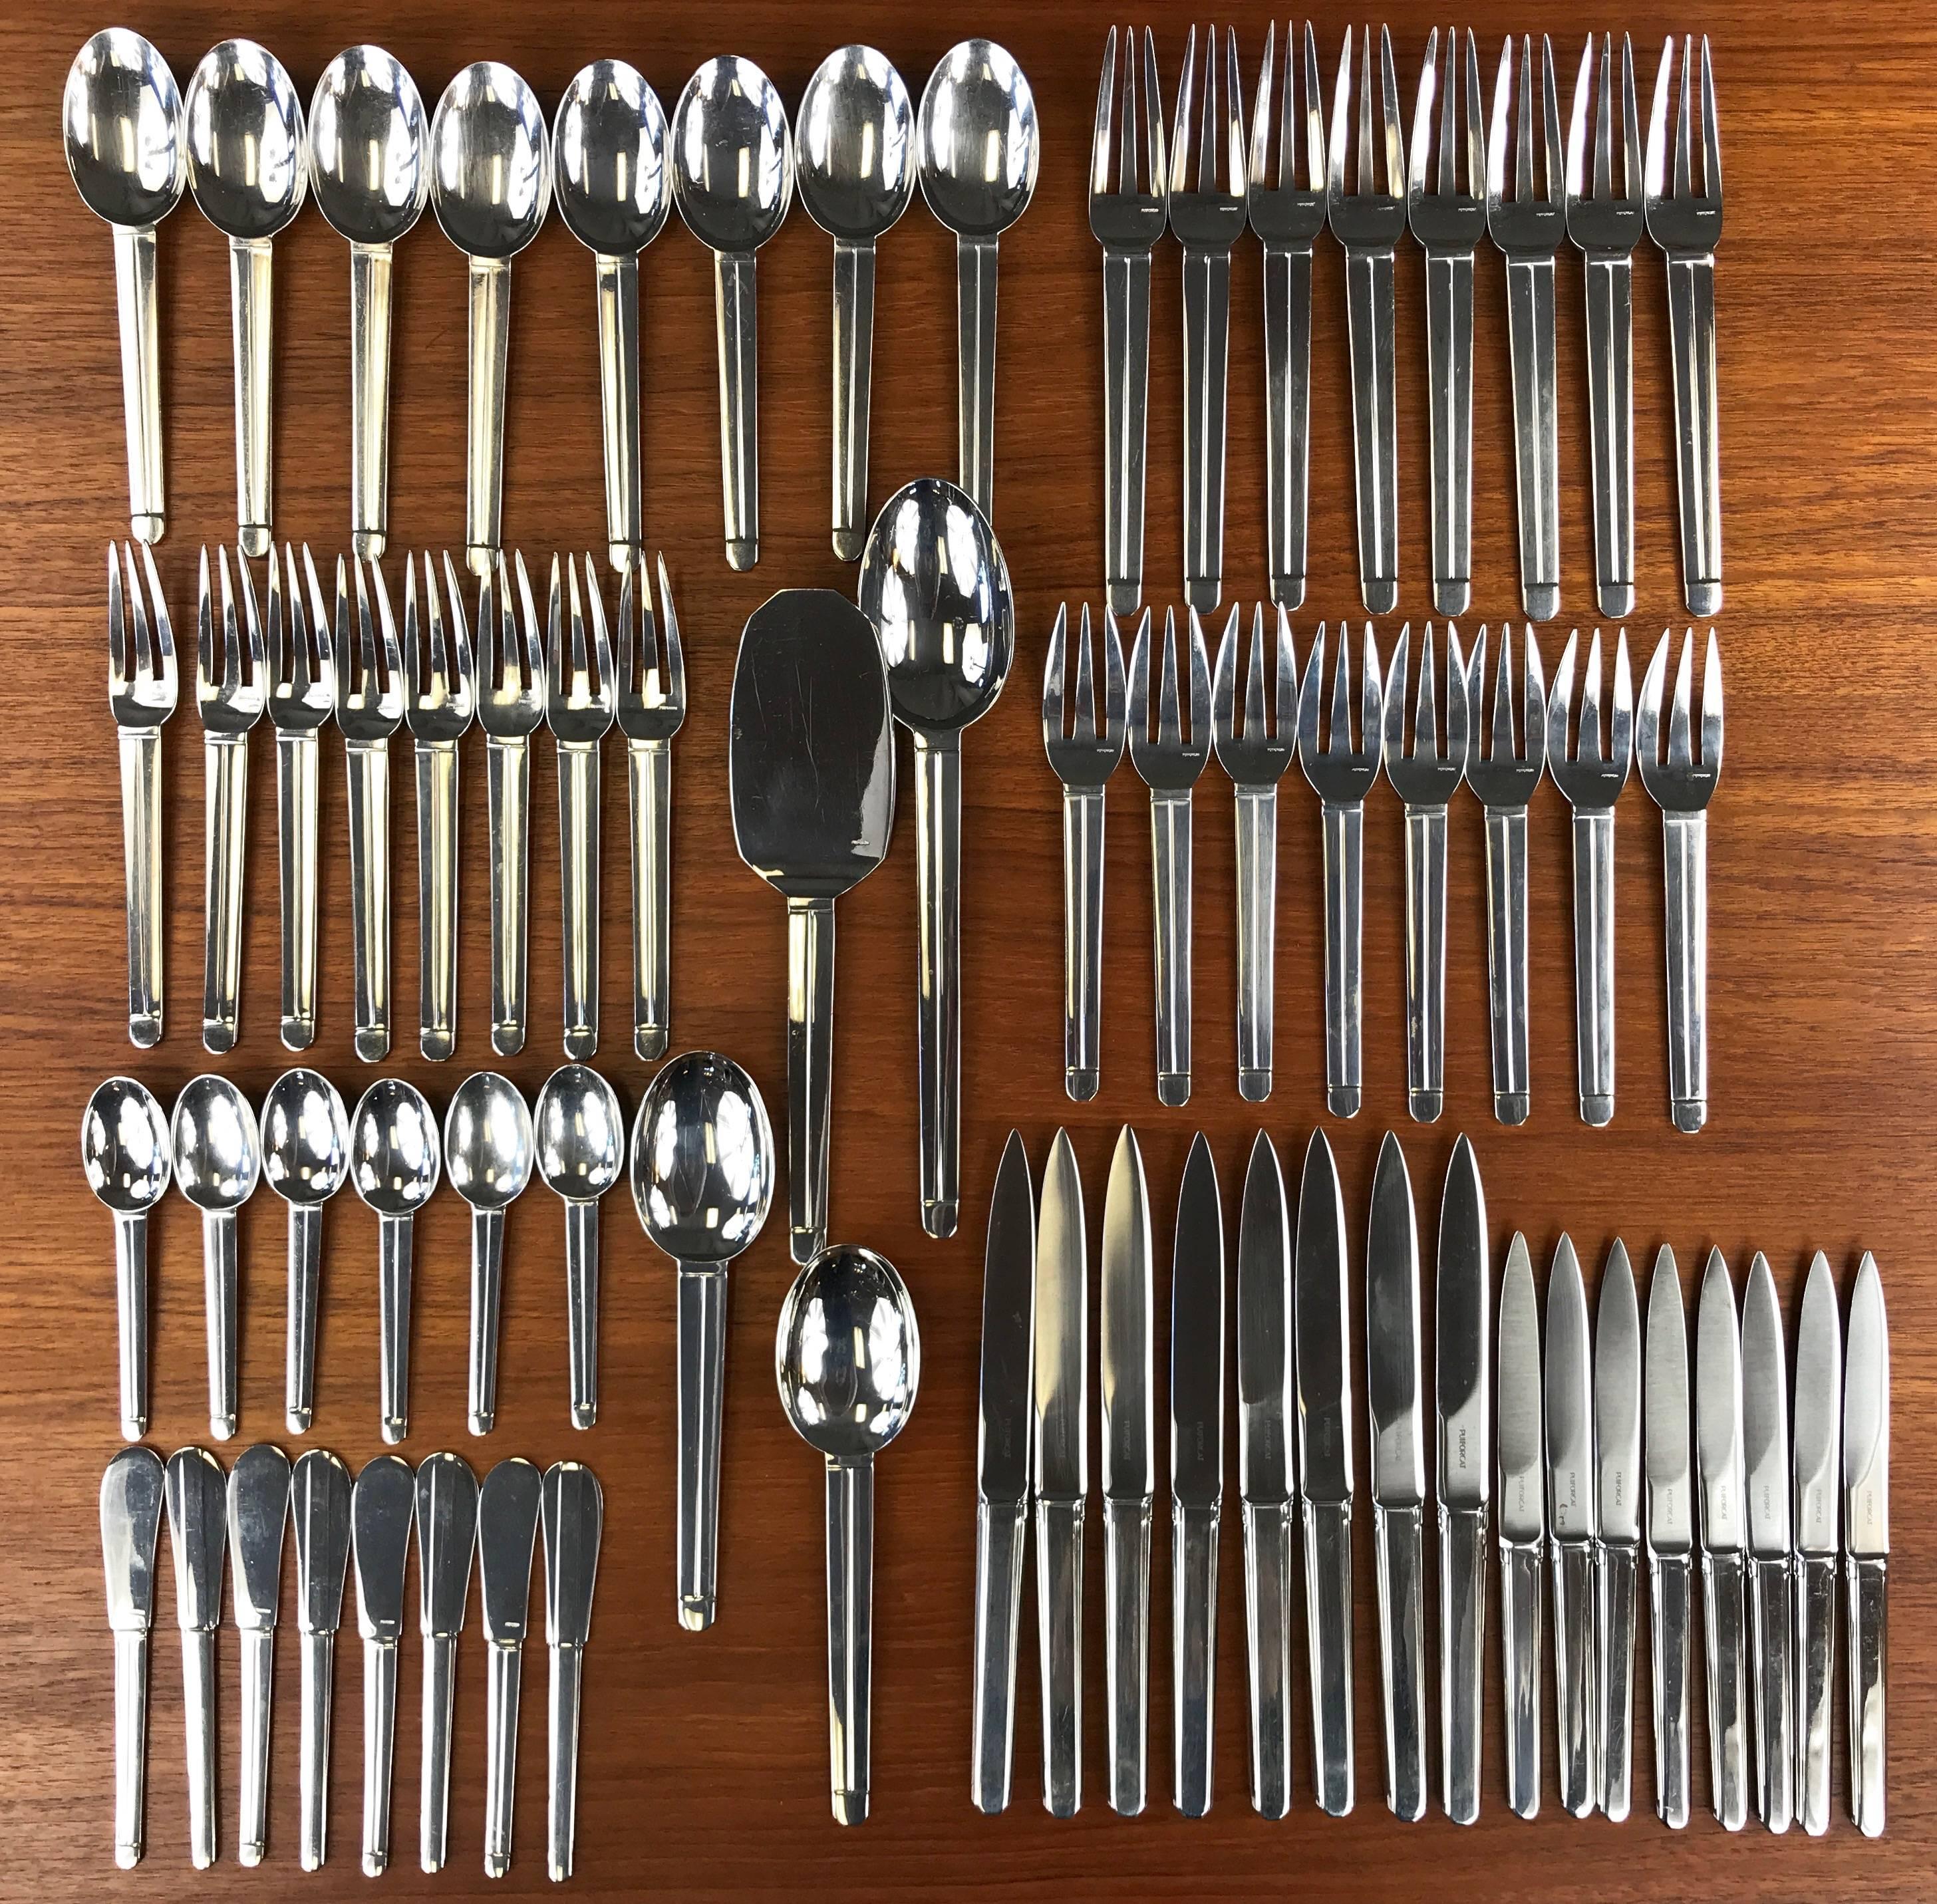 A “Guethary” 58-piece stainless steel flatware service for eight by Puiforcat.

Designed in 1926 by Jean Puiforcat, the pattern has bold proportions and streamlined details that perfectly embody the Art Deco era while still feeling distinctly